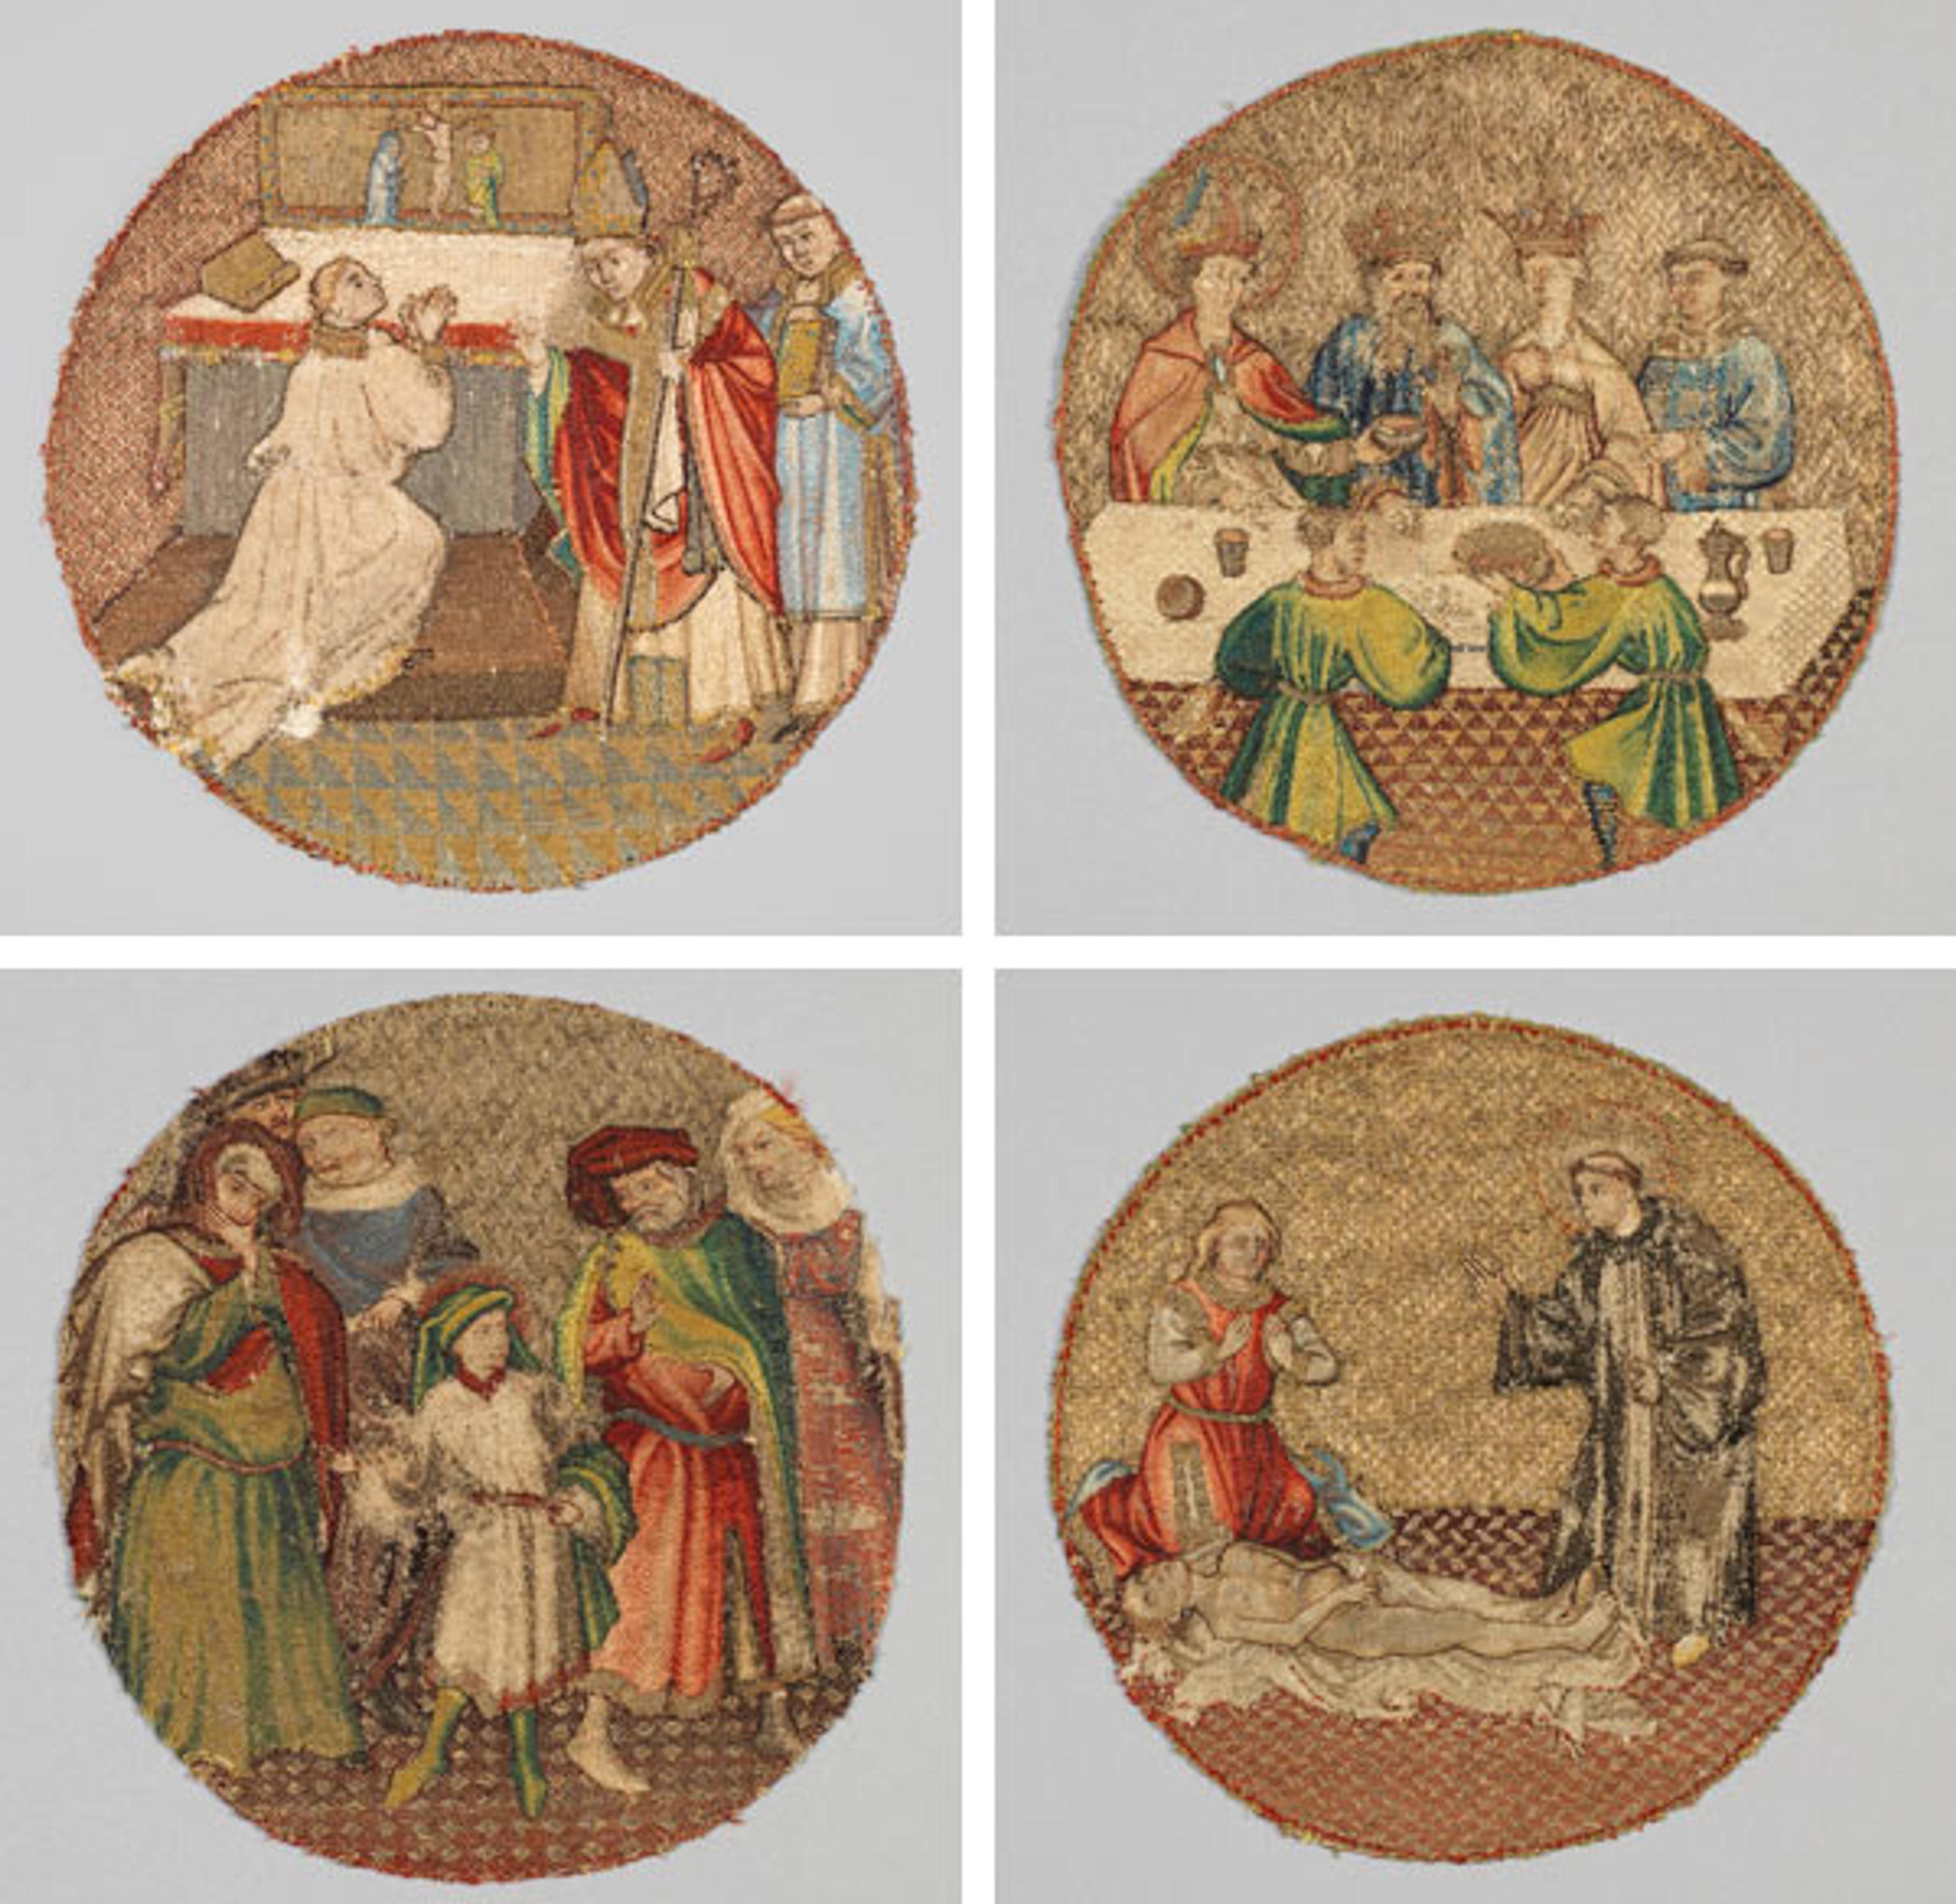 Banner image: Top left: Saint Martin and Saint Hilary, 1430–35. Flanders. Linen plain weave underlaid with linen plain weave (two layers) and embroidered with silk and gilt-metal-strip-wrapped silk in single satin, split, and stem stitches, laid work, and couching, including or nué; Diameter (above measurement of mount opening): 6 1/2 in. (16.5 cm). The Metropolitan Museum of Art, New York, Gift of Robert Lehman, 1975 (1975.1.1908). Top right: Saint Martin Offering the Wine Cup to the Priest, 1430–35. Flemish. Linen plain weave underlaid with linen plain weave (two layers) and embroidered with silk and gilt-metal-strip-wrapped silk in single satin, split, and stem stitches, laid work, and couching, including or nué; Diameter (above measurement of mount opening): 6 1/2 in. (16.5 cm). The Metropolitan Museum of Art, New York, Gift of Robert Lehman, 1975 (1975.1.1907). Bottom left: Saint Martin Announcing to His Parents That He Will Become a Christian, 1430–35. Flemish. Linen plain weave underlaid with linen plain weave (two layers) and embroidered with silk and gilt-metal-strip-wrapped silk in single satin, split, and stem stitches, laid work, and couching, including or nué; Diameter (above measurement of mount opening): 6 1/2 in. (16.5 cm). The Metropolitan Museum of Art, New York, Gift of Robert Lehman, 1975 (1975.1.1909). Bottom right: Saint Martin Brings a Dead Man to Life, 1430–35. Flemish. Linen plain weave underlaid with linen plain weave (two layers) and embroidered with silk and gilt-metal-strip-wrapped silk in single satin, split, and stem stitches, laid work, and couching, including or nué; Diameter (above measurement of mount opening): 6 1/2 in. (16.5 cm). The Metropolitan Museum of Art, New York, Gift of Robert Lehman, 1975 (1975.1.1906)